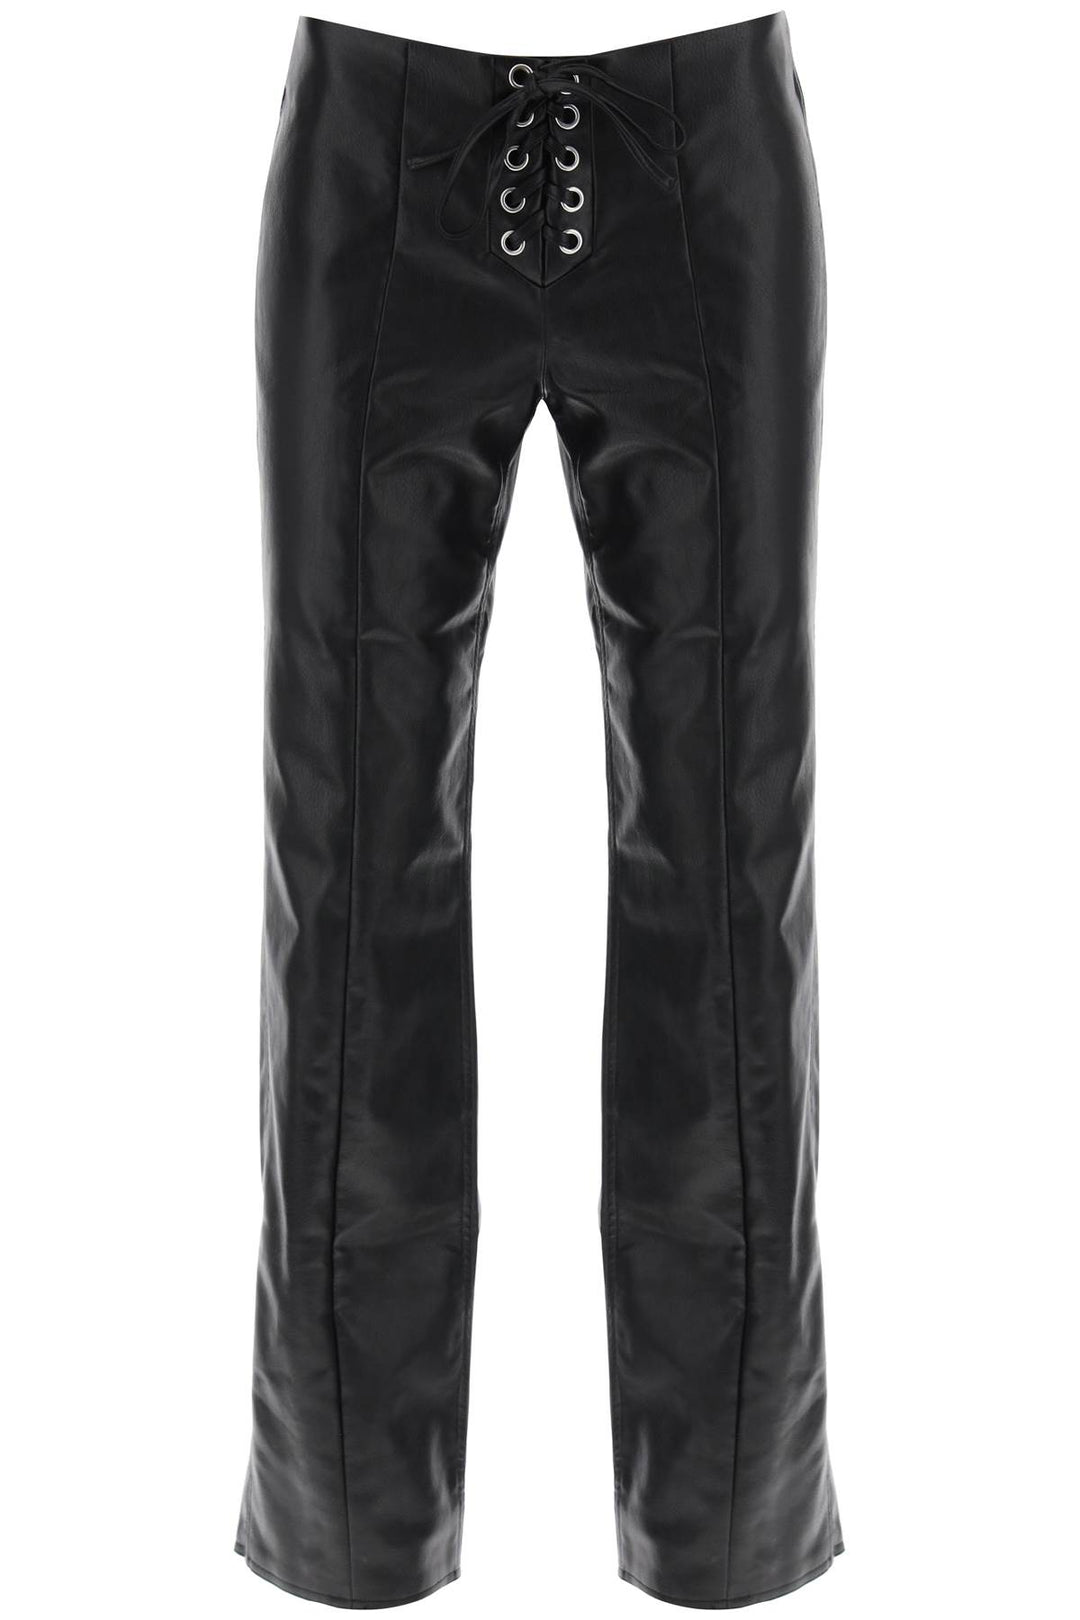 Rotate straight-cut pants in faux leather-0